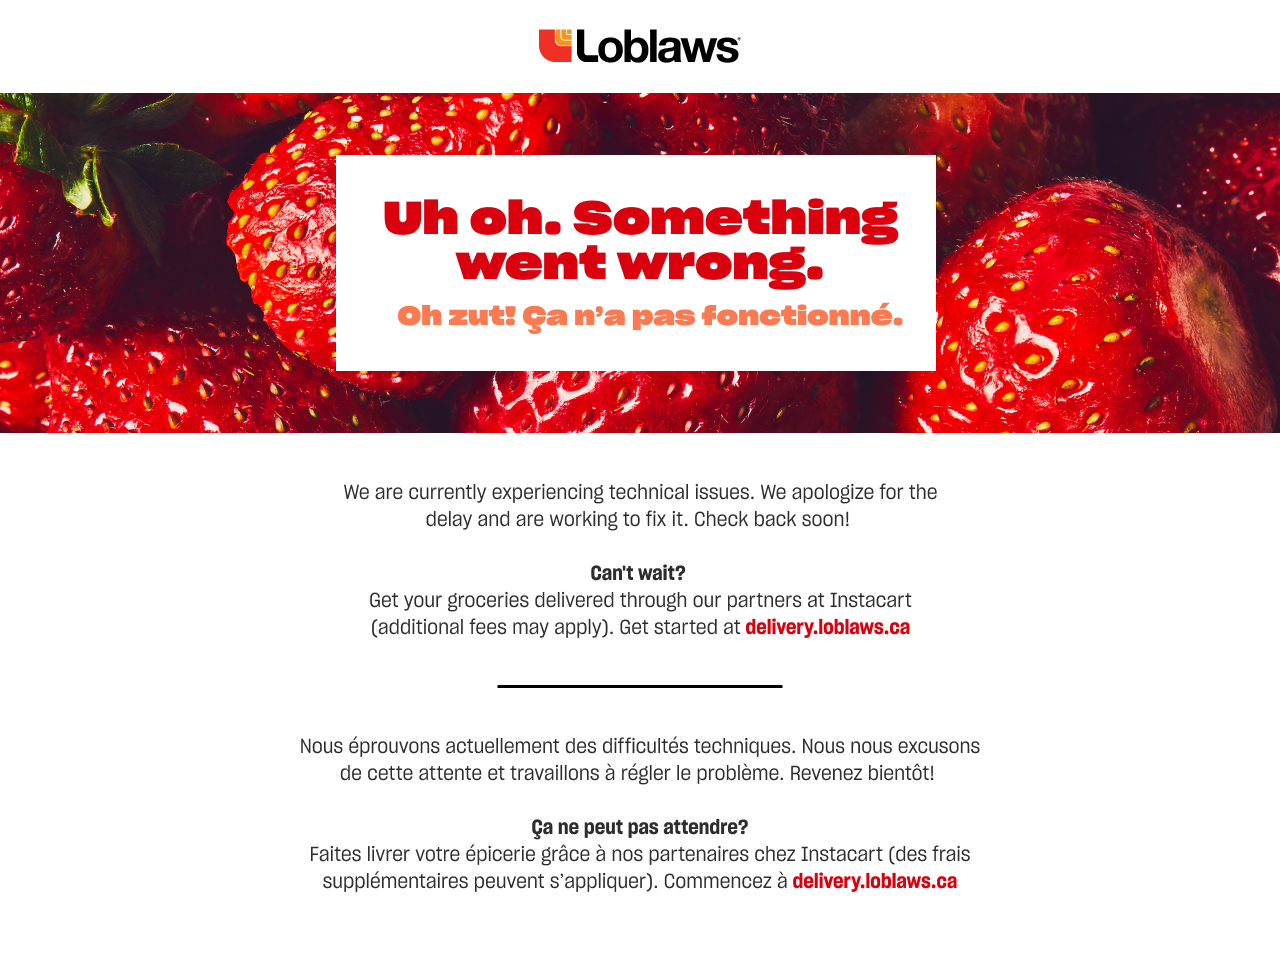 Uh oh. Something went wrong. We are currently experiencing technical issues due to an exceptional volume of traffic to our site. We apologize for the delay and are working to fix it. Looking for online grocery delivery? You can still order groceries online with our partners at Instacart. Get started at delivery.loblaws.ca . Please note that Instacart deliver fees may vary.